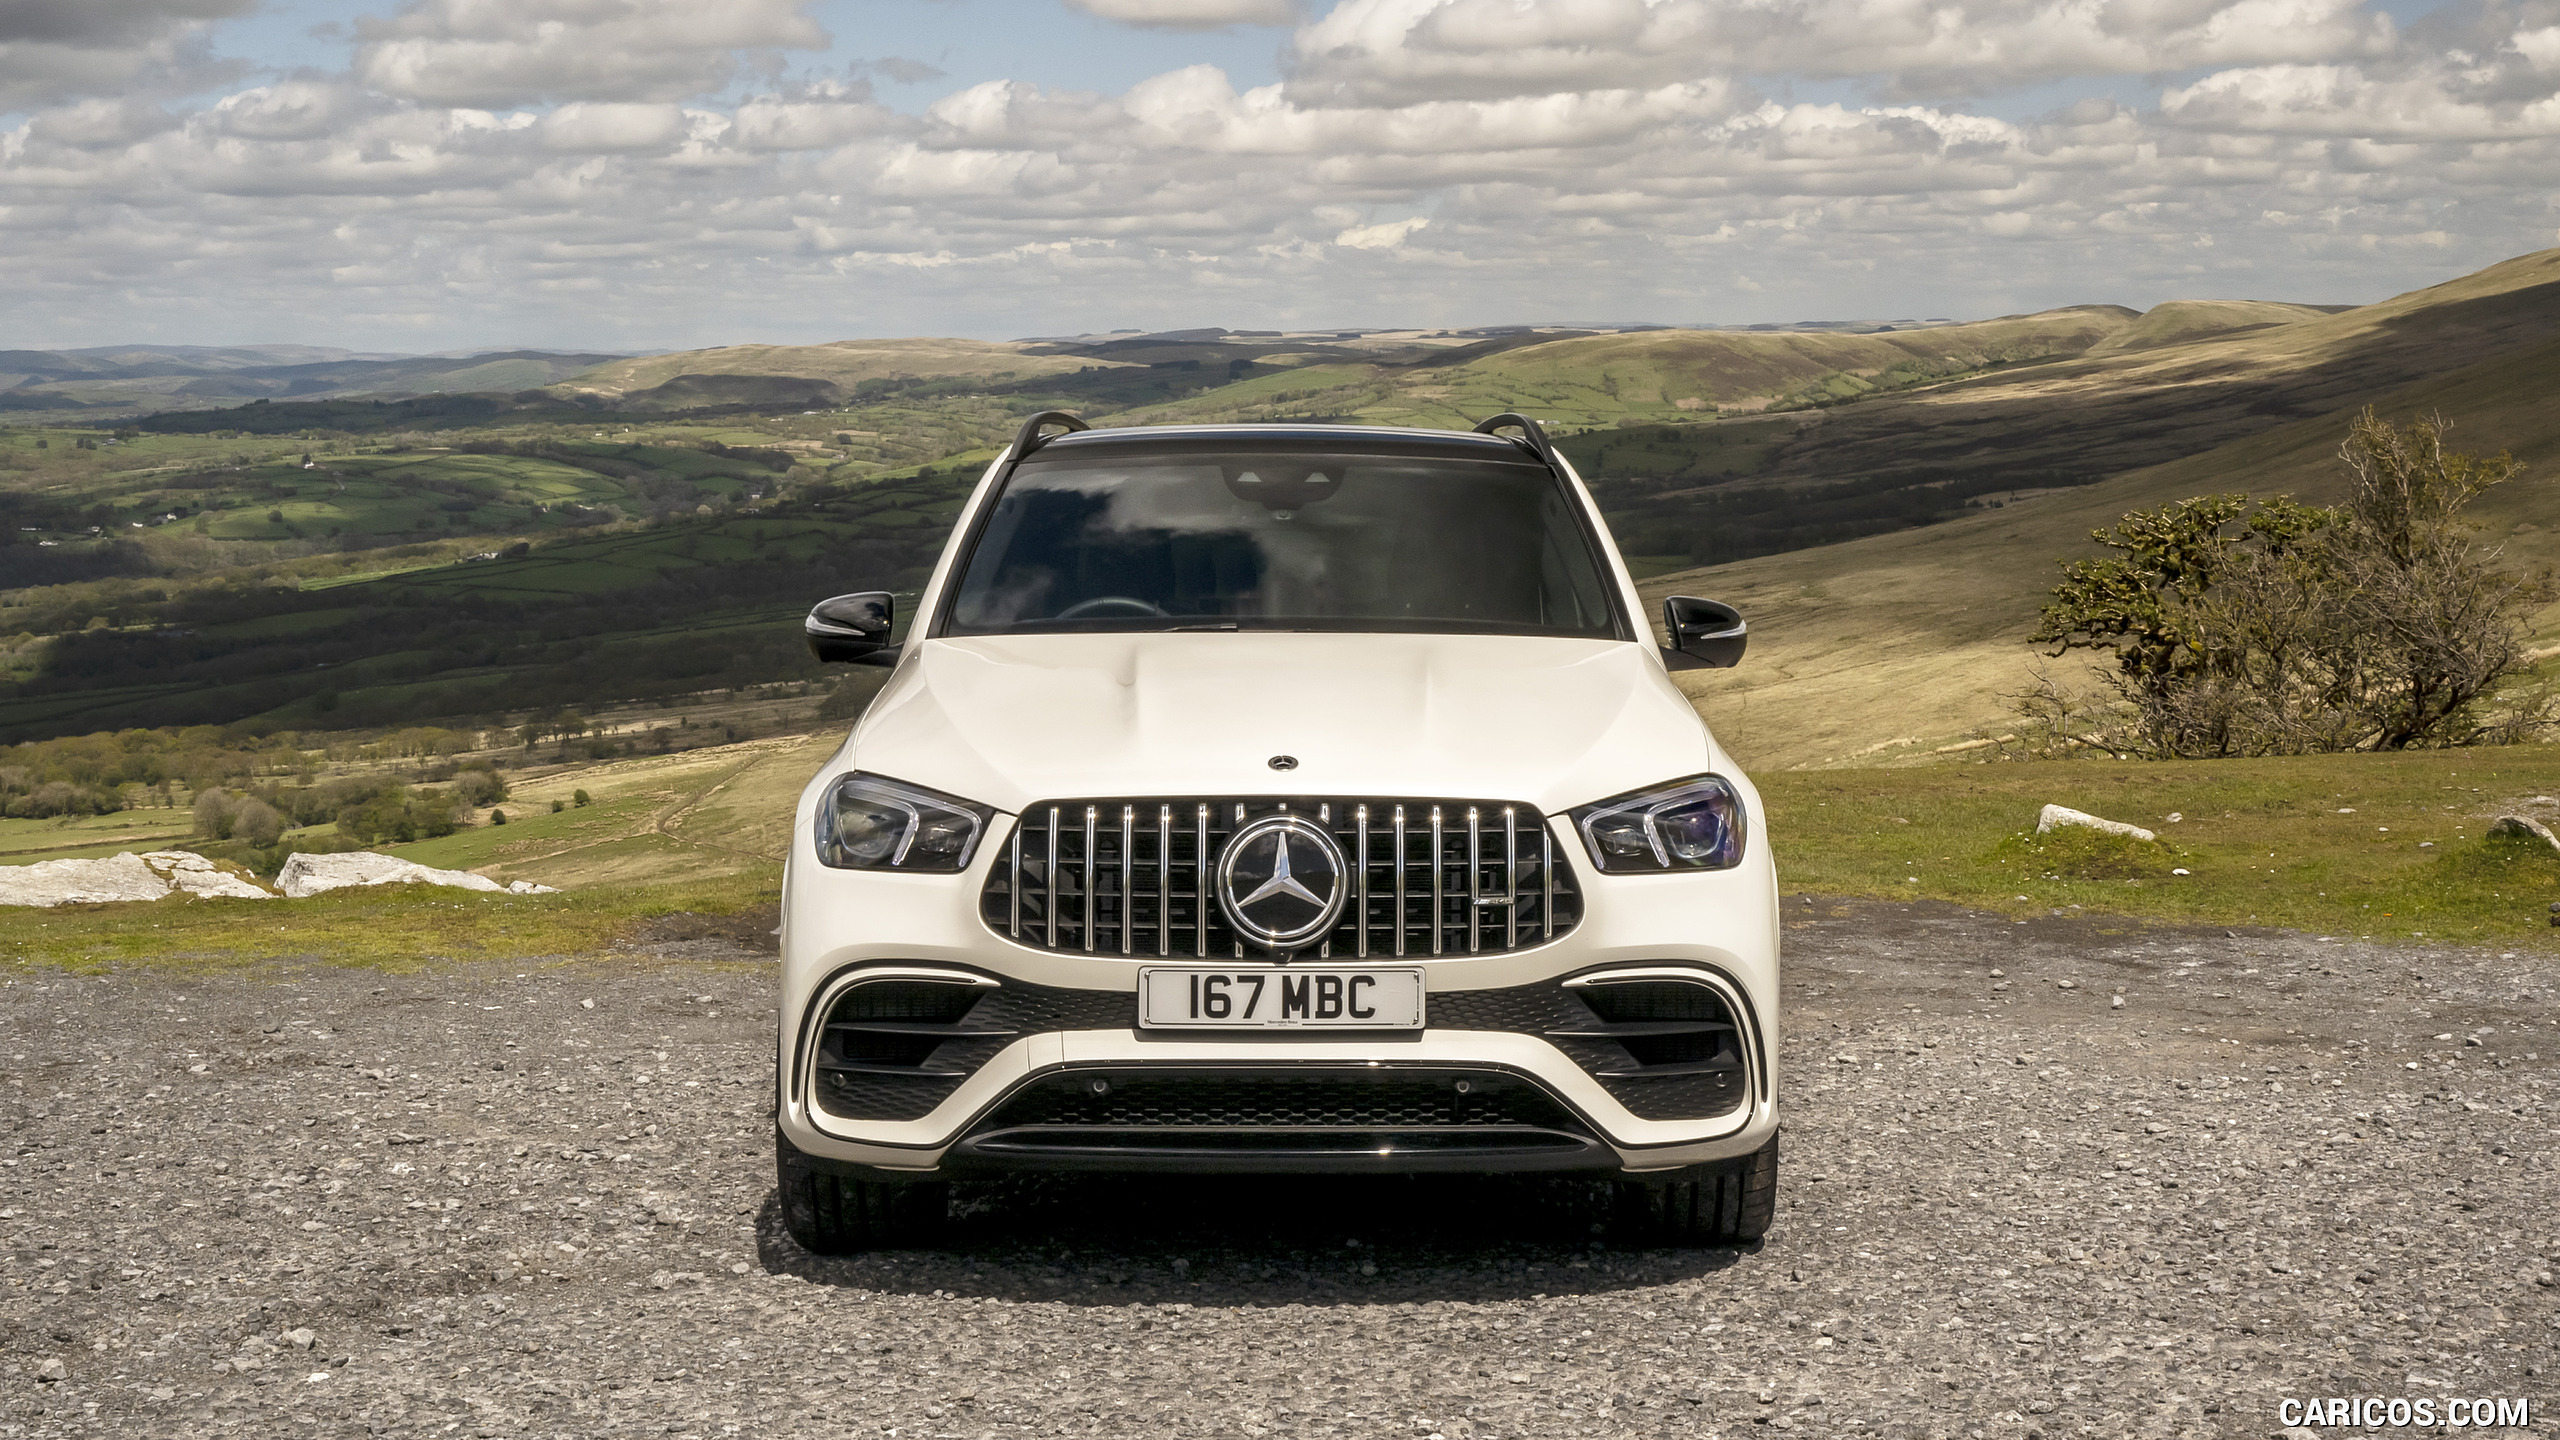 2021 Mercedes-AMG GLE 63 S 4MATIC (UK-Spec) - Front, #145 of 187